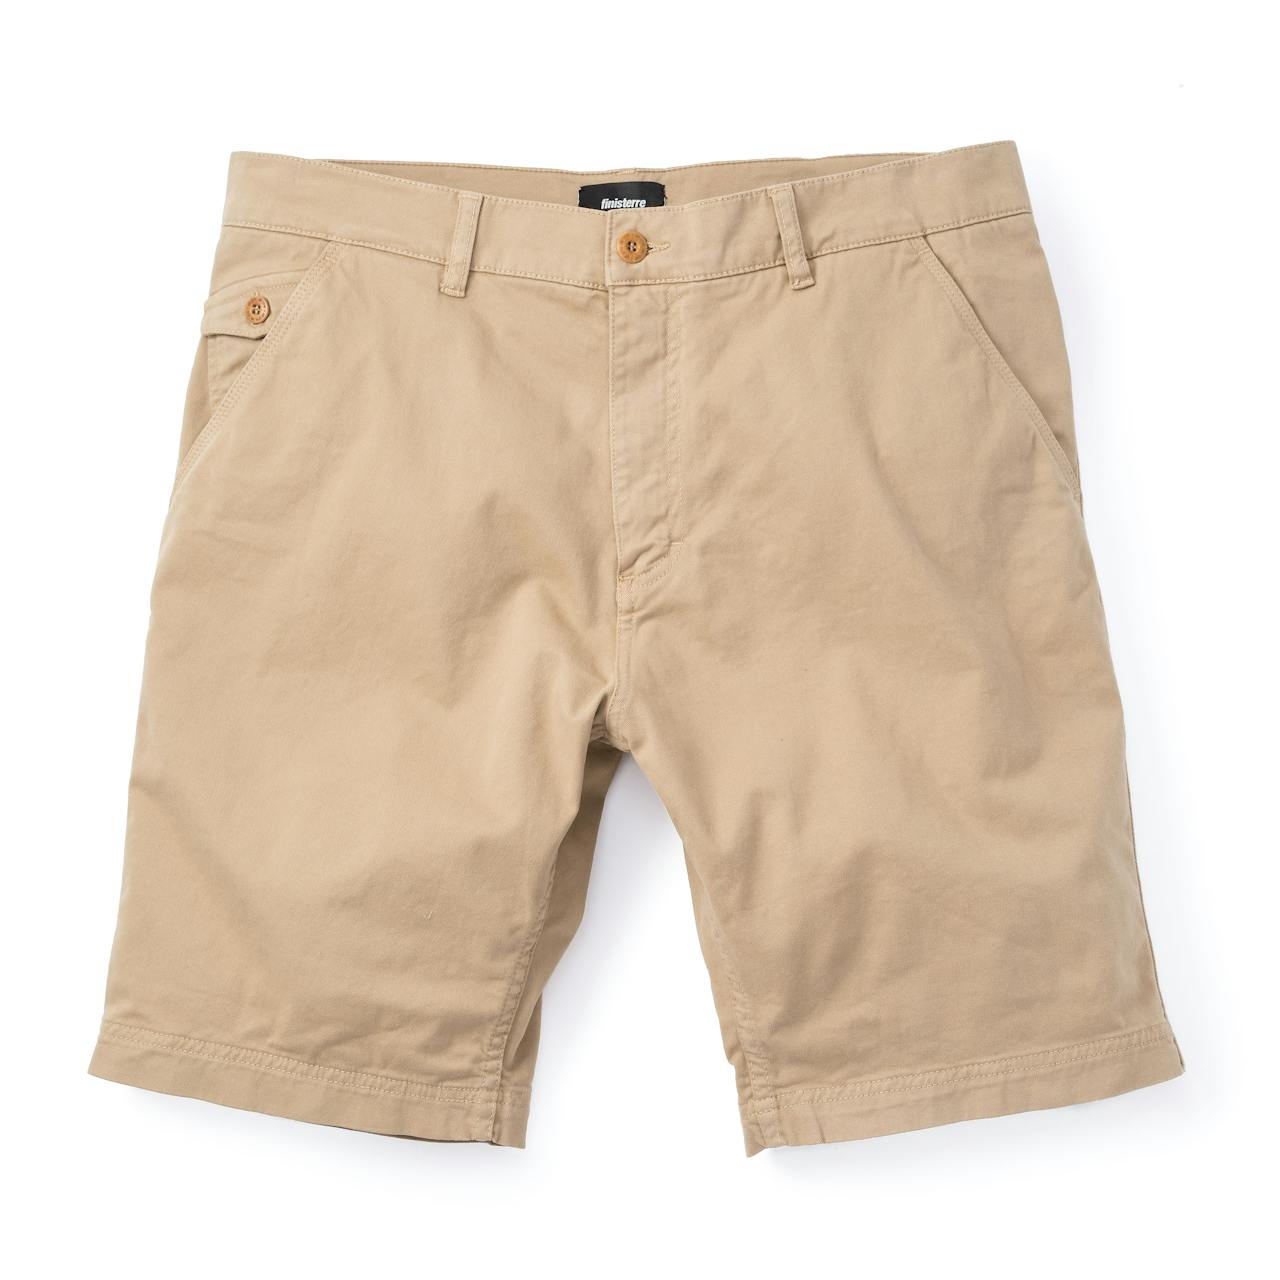 Finisterre Coverack Shorts